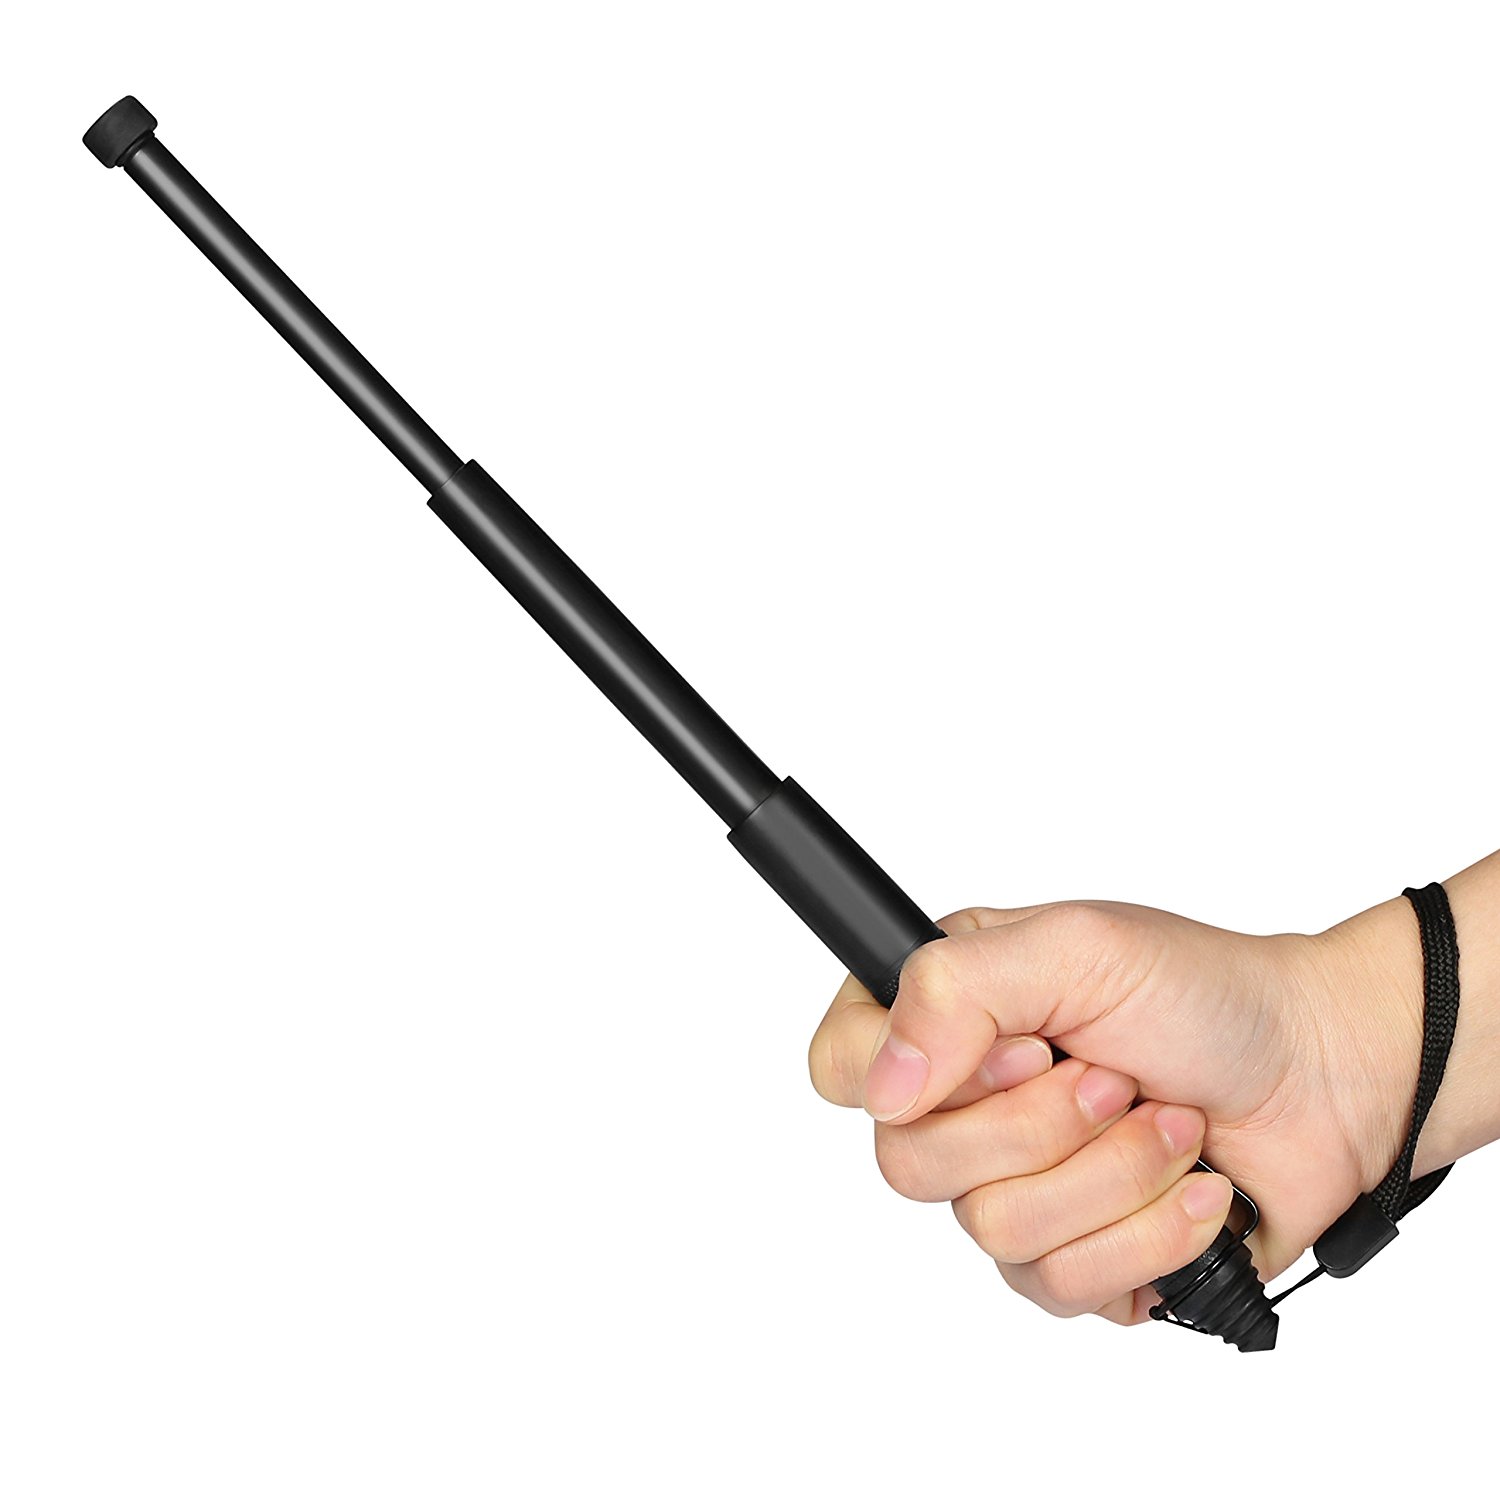 Expandable baton for <a href="https://amzn.to/2s6LISp">only $20.99</a>